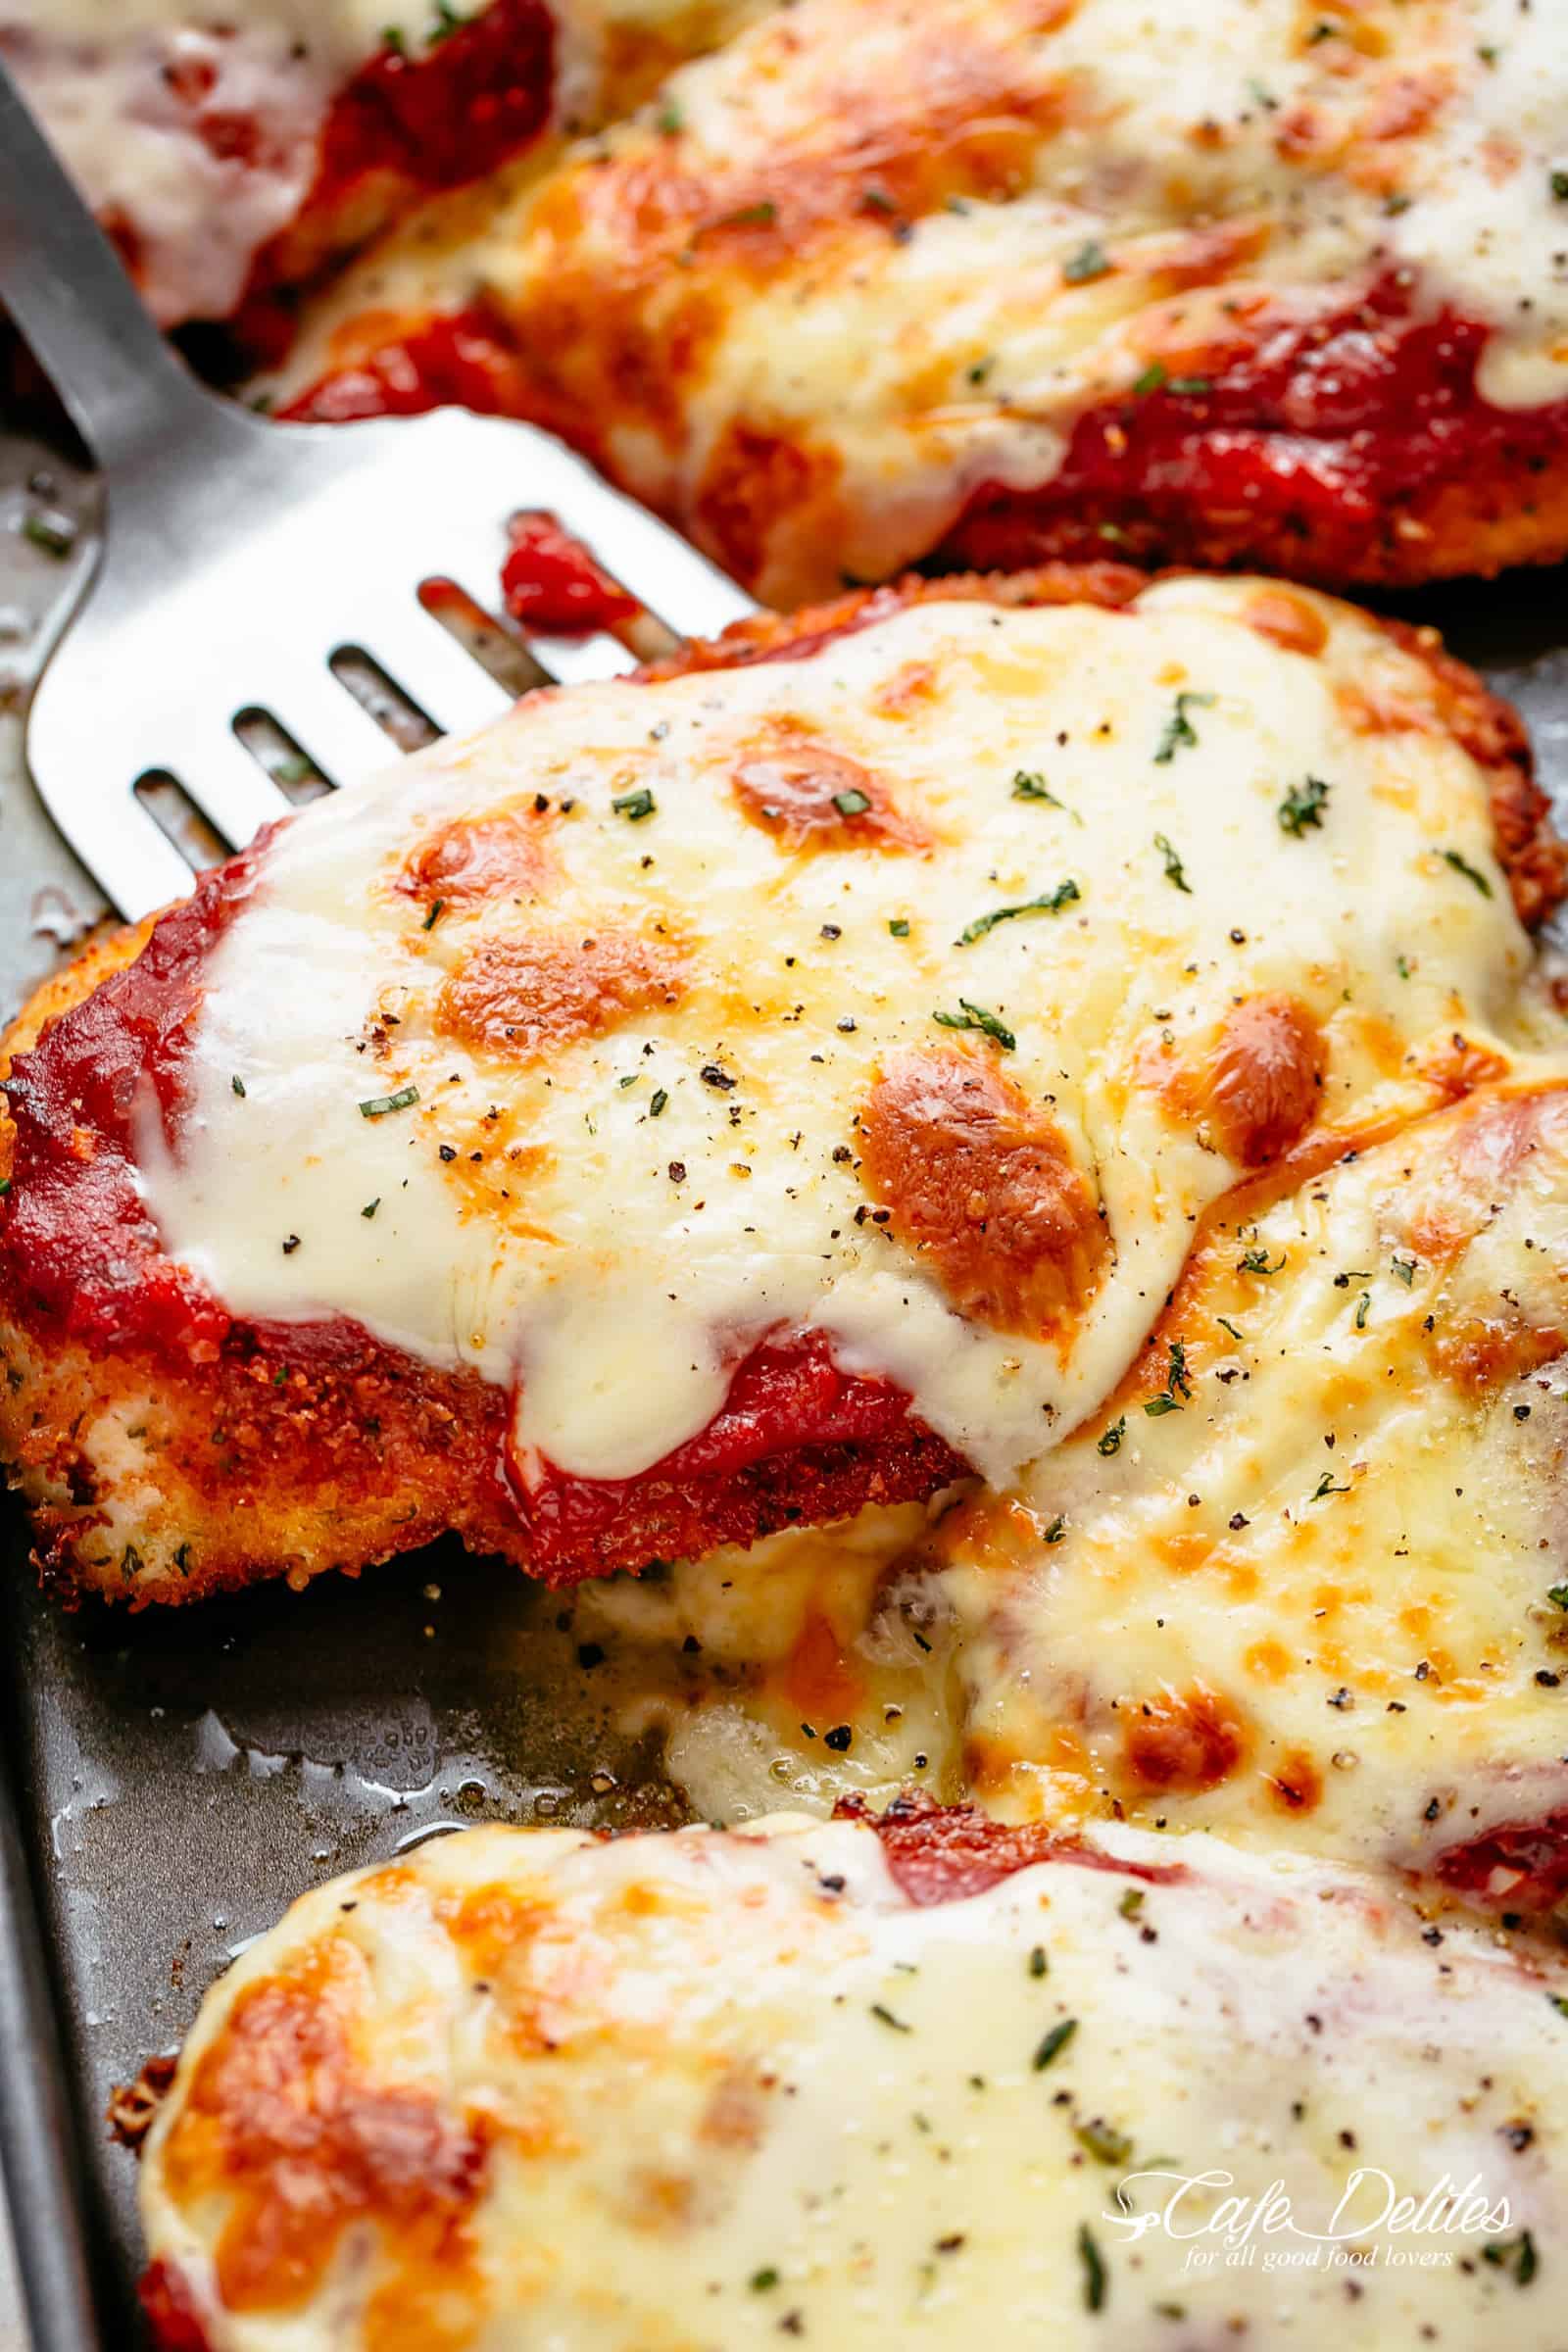 The Best Chicken Parmesan with a deliciously crispy breadcrumb coating, smothered in a rich homemade tomato sauce and melted mozzarella cheese! This is here best Chicken Parmesan you will ever make! Simple to make and worth every minute. If you love a crispy crumb coating vs soggy crumb, look no further! | cafedelites.com